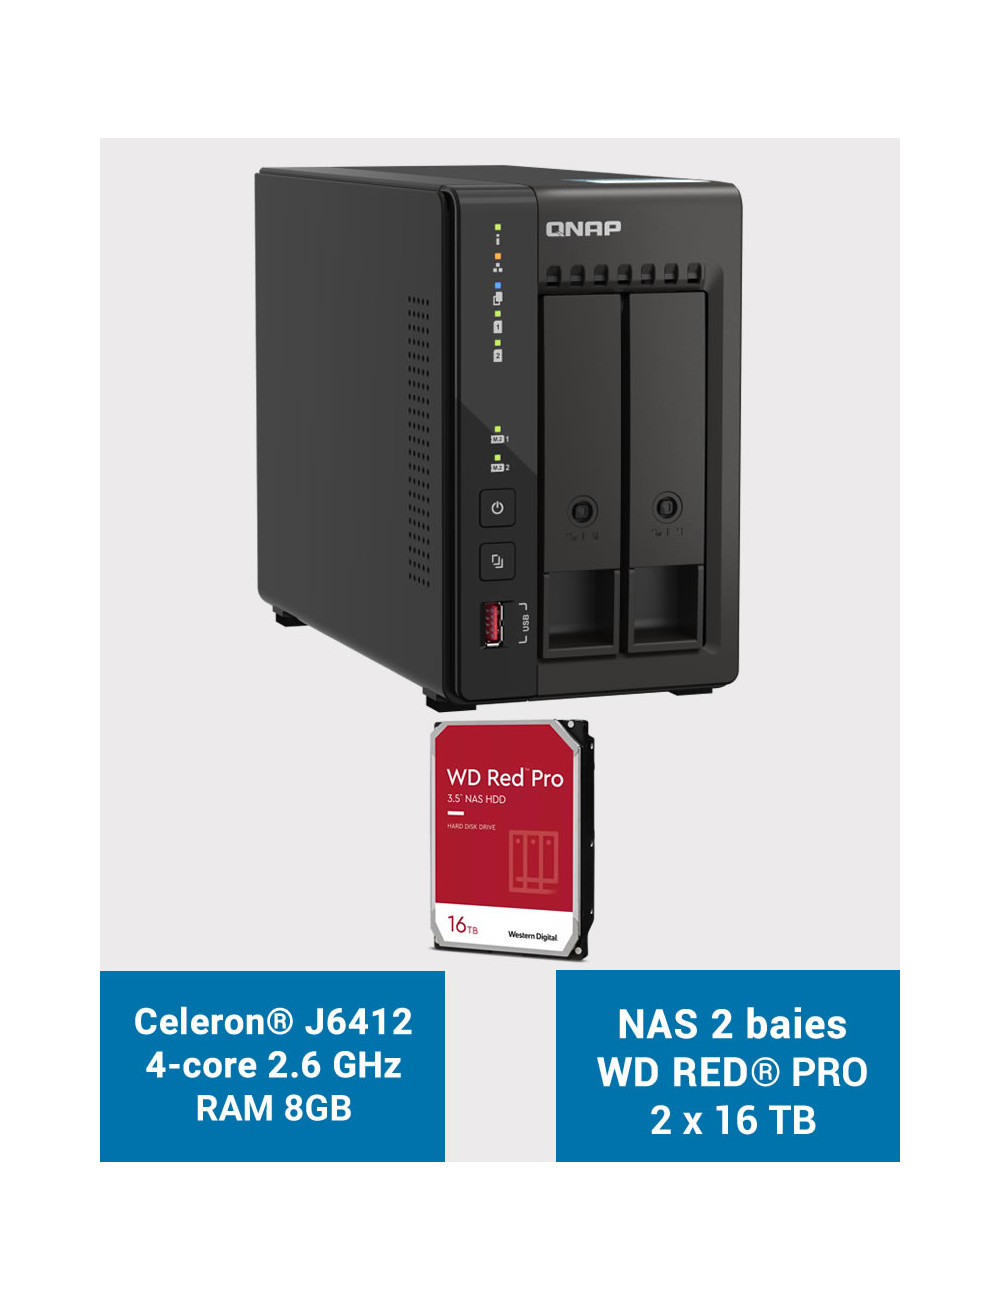 QNAP TS-253E 8GB Serveur NAS 2 baies WD RED PRO 32To (2x16To)